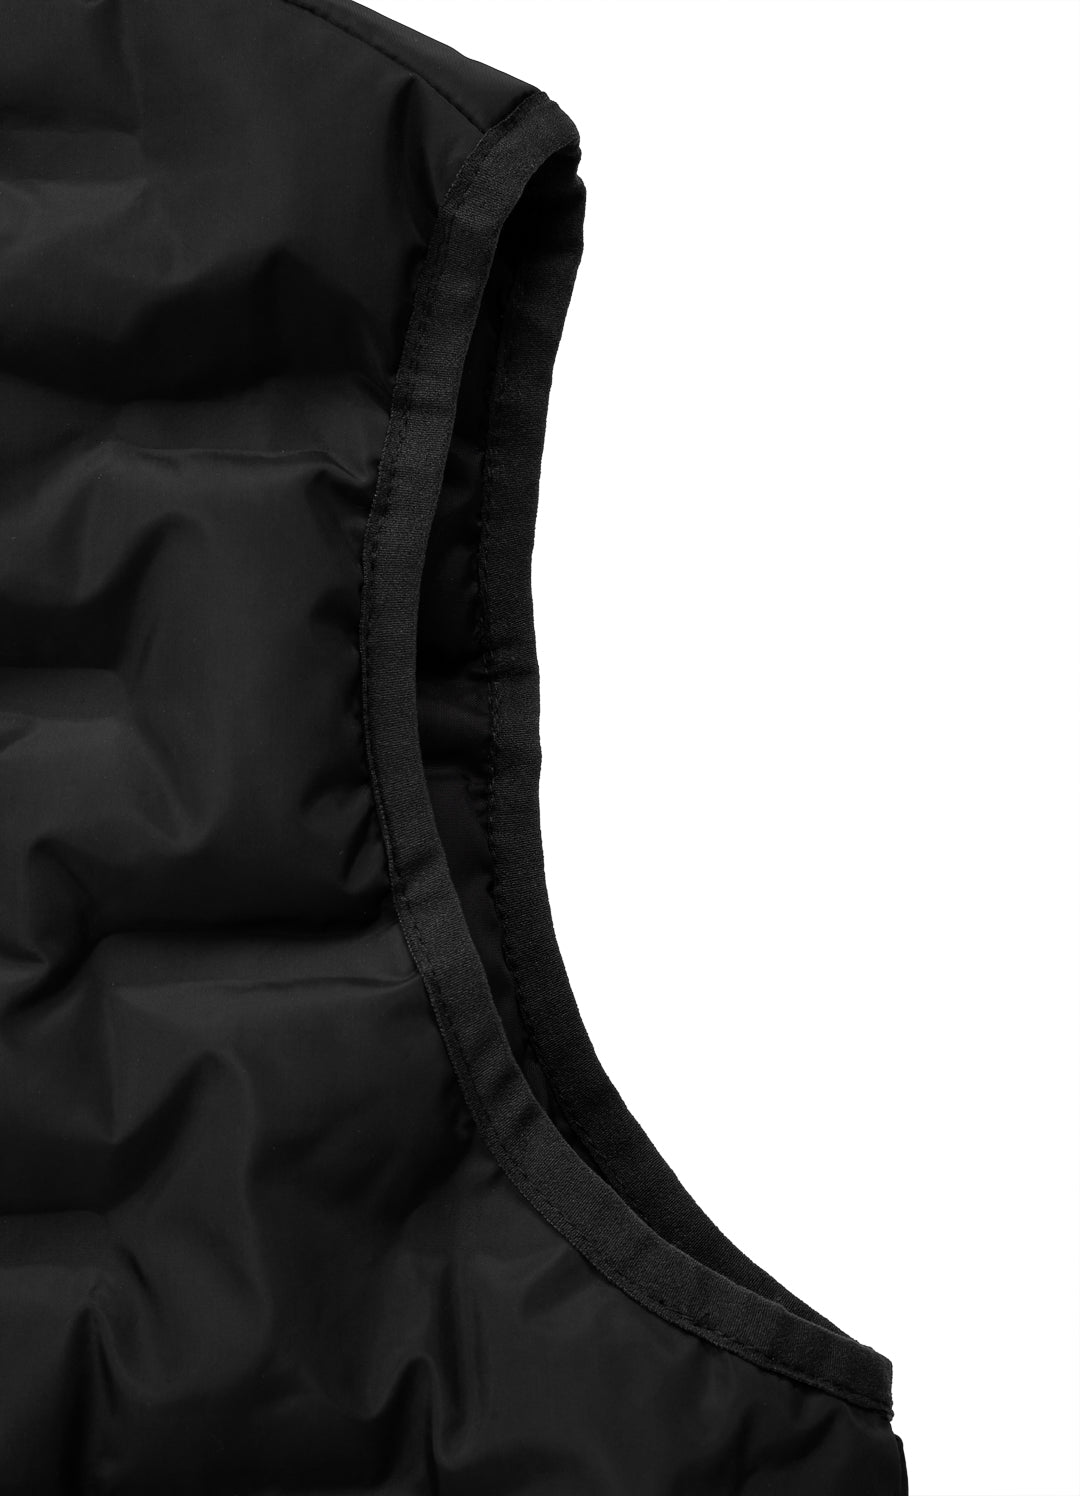 Quilted Hooded Vest CARVER Black - Pitbull West Coast International Store 